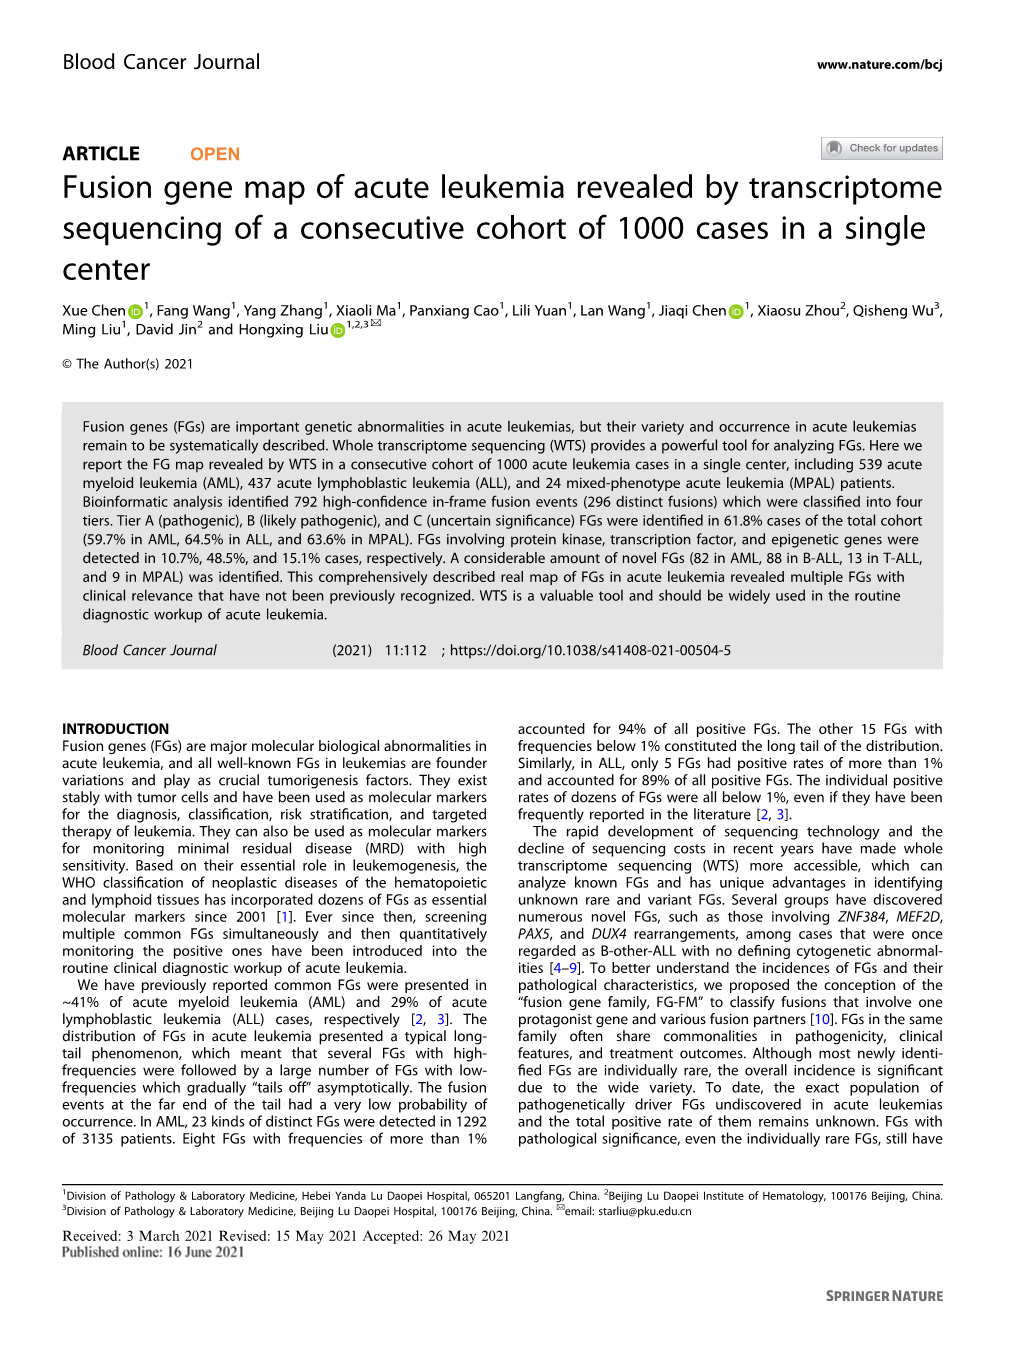 Fusion Gene Map of Acute Leukemia Revealed by Transcriptome Sequencing of a Consecutive Cohort of 1000 Cases in a Single Center